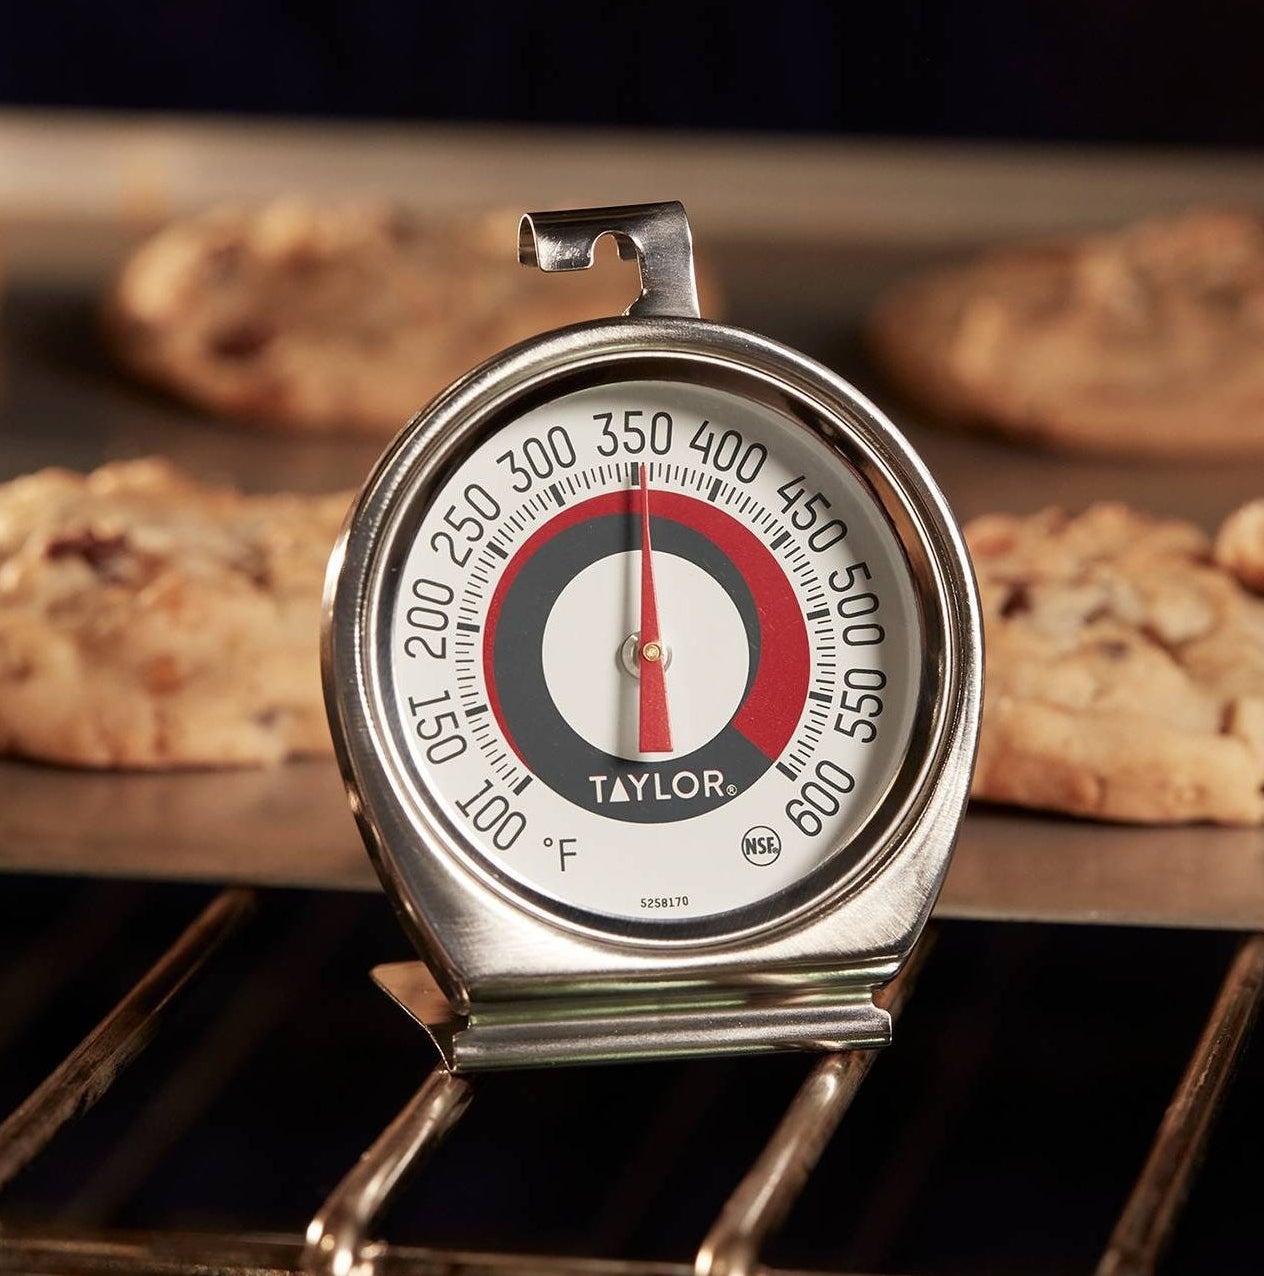 The oven and grill temperature thermometer